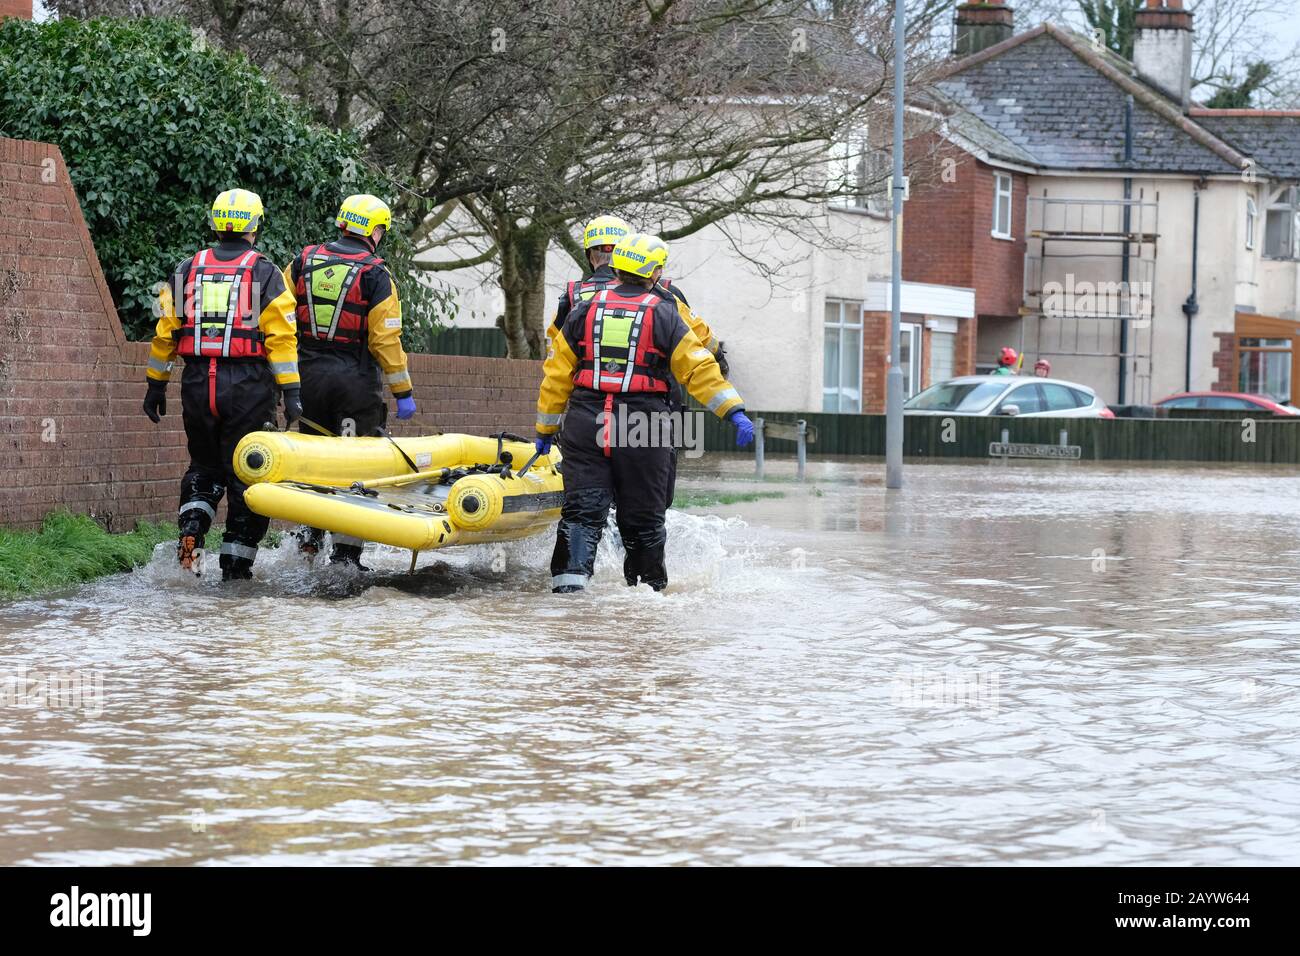 Hereford, Herefordshire, UK - Monday 17th February 2020 - Major flooding in the Hinton Road area of the city after the River Wye burst its banks.  Local Fire Rescue crews enter floodwater to rescue residents after the River Wye rose to record levels. Photo Steven May / Alamy Live News Stock Photo